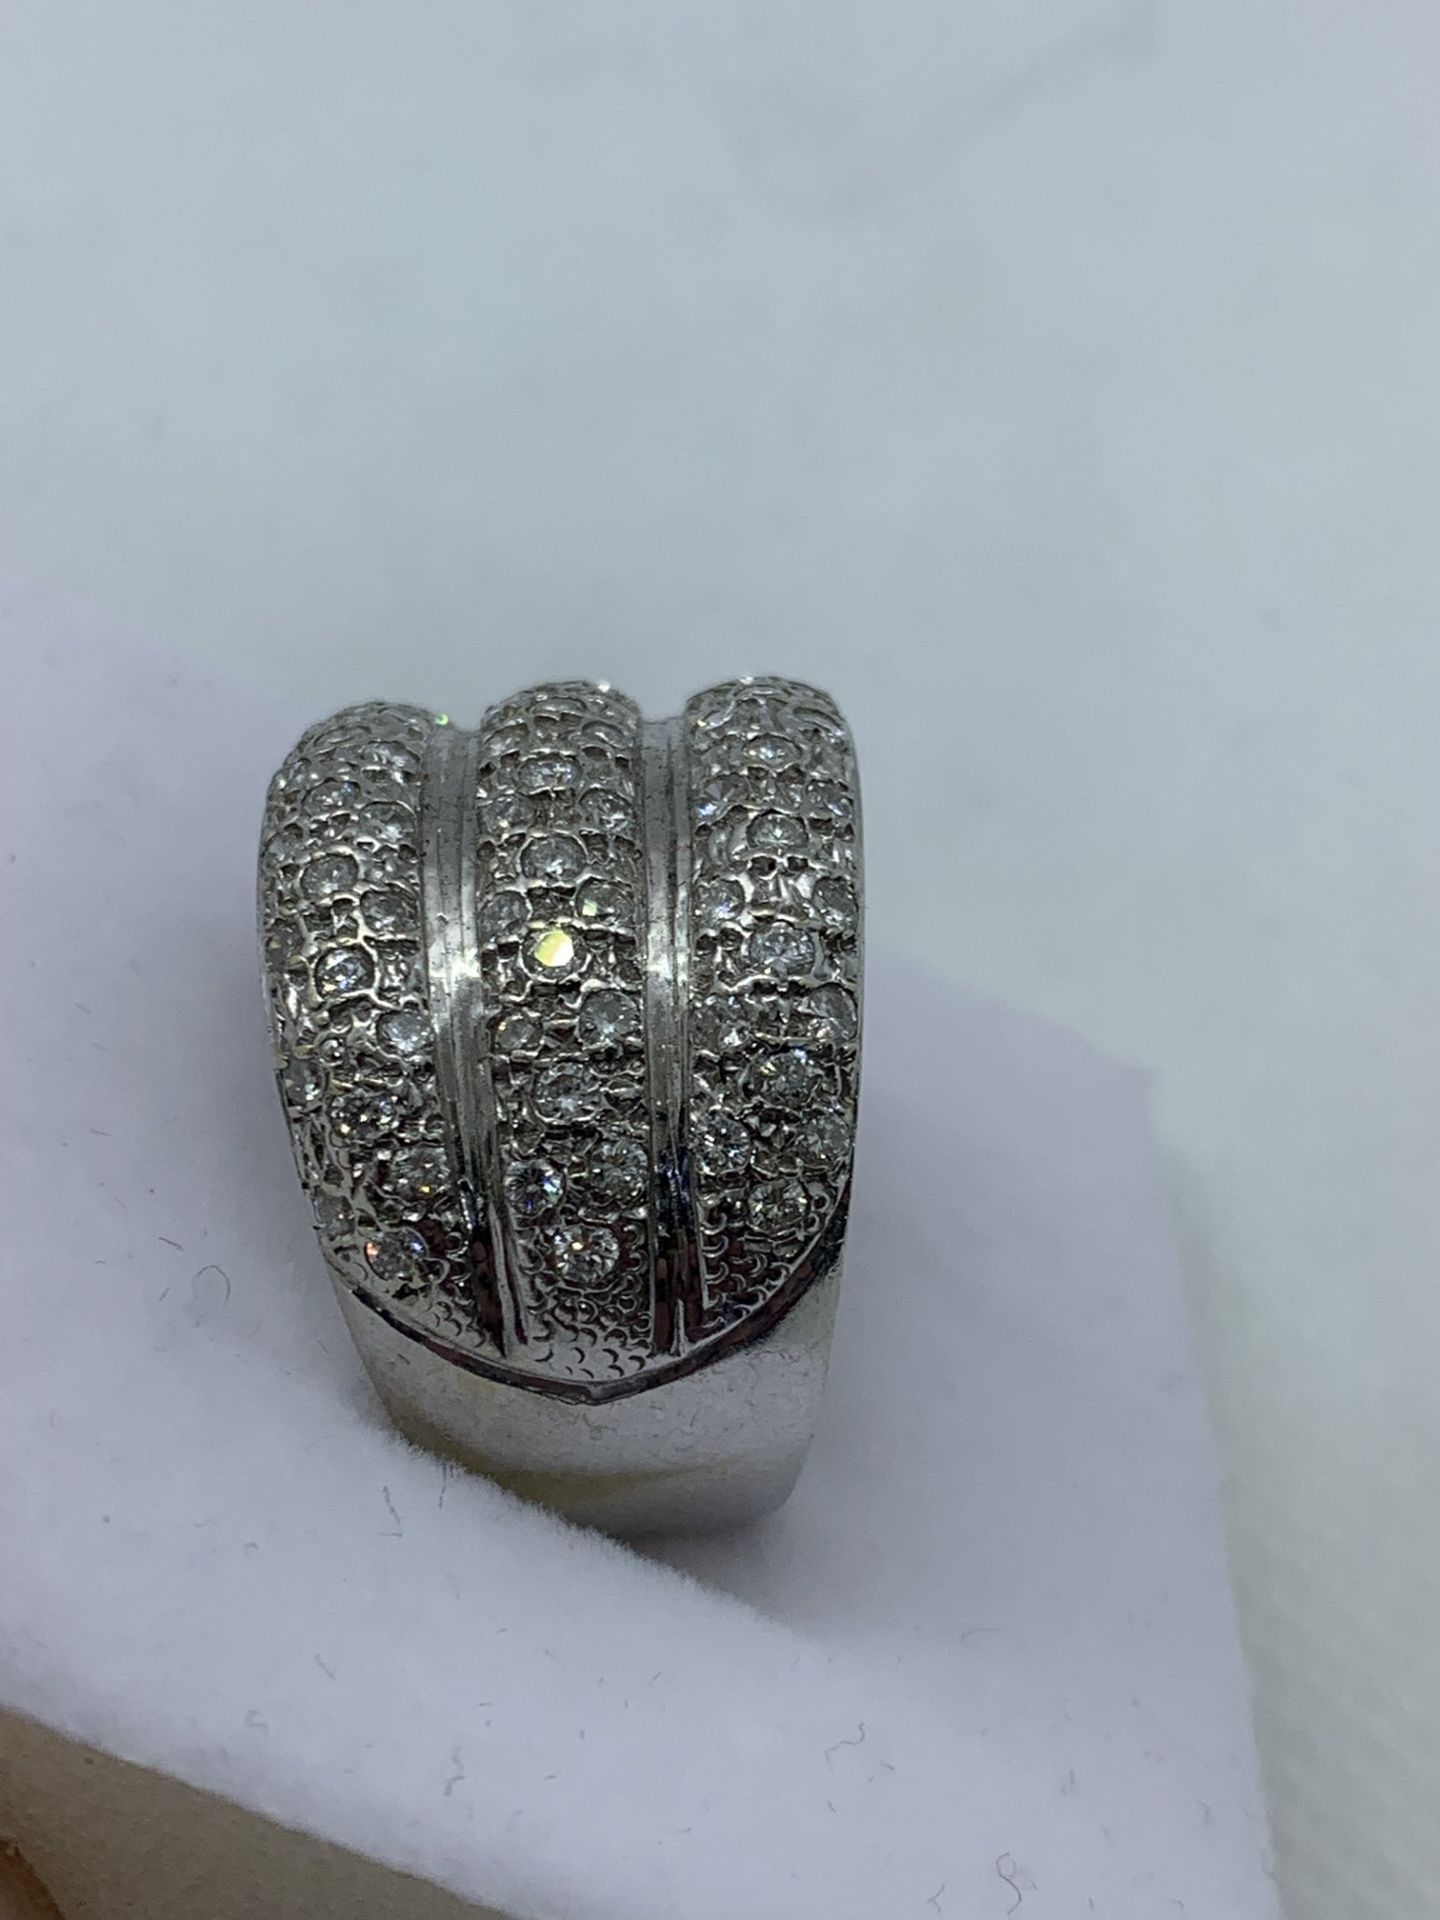 21.8 GRAMS 3 ROW DIAMOND UNISEX RING IN WHITE METAL TESTED AS 18ct GOLD - Image 2 of 3